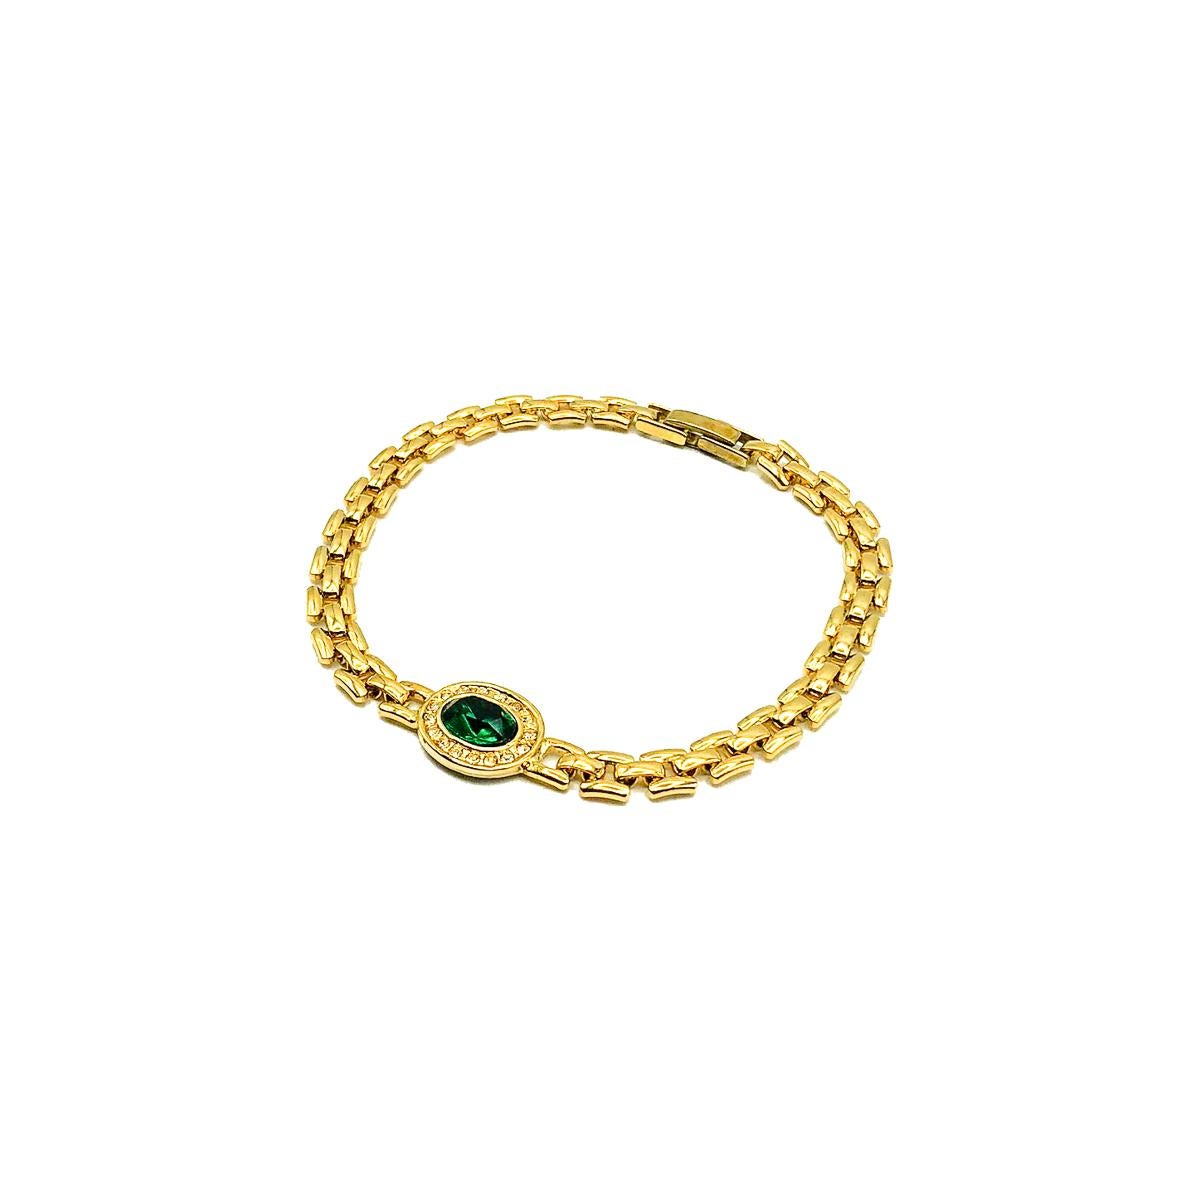 A Vintage Emerald Crystal Bracelet. Featuring a watch strap style chain link with an oval emerald crystal surrounded by clear chaton crystals in the central motif. Crafted in gold plated metal. 19cms. In very good vintage condition. A very pretty